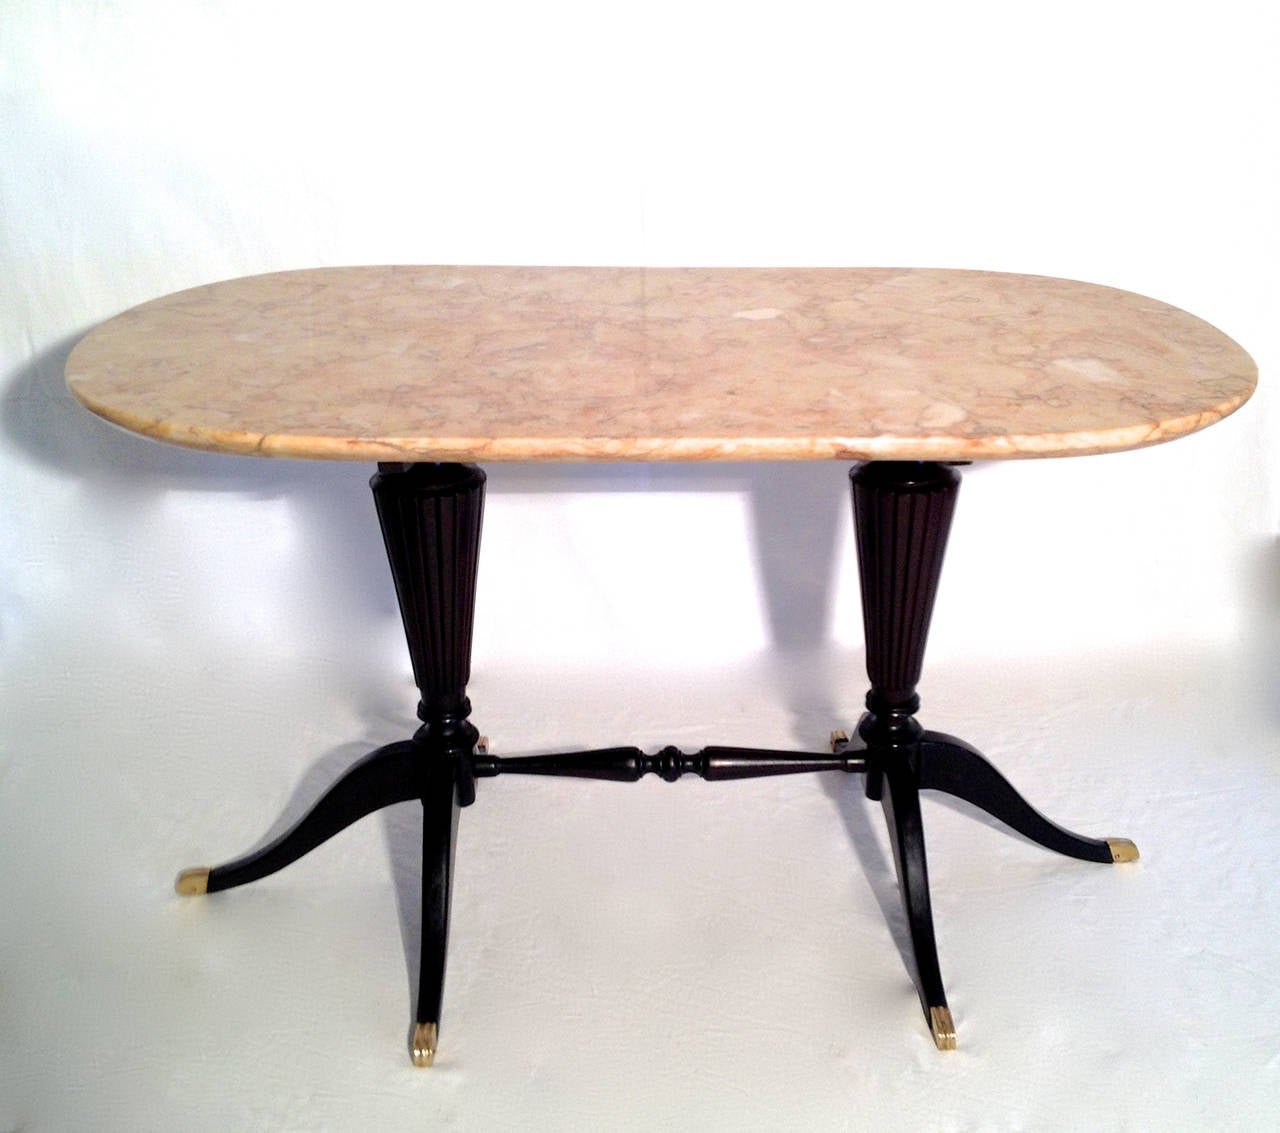 Very rare and elegant 1940s Italian design table with oval shaped salmon coloured marble top on articulate double foot base with centre rod and with brass details. The table is signed and numbered with the manufacturer's label.